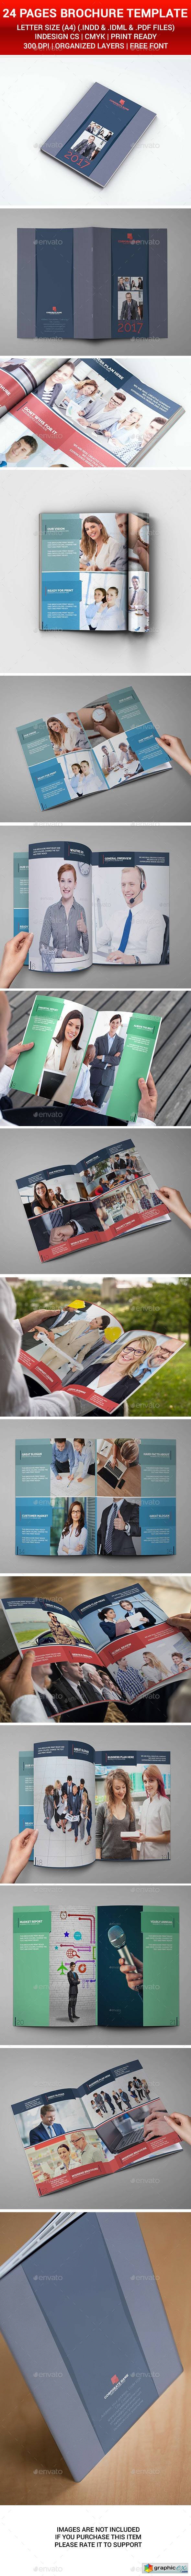 Corporate Brochure 24 Pages